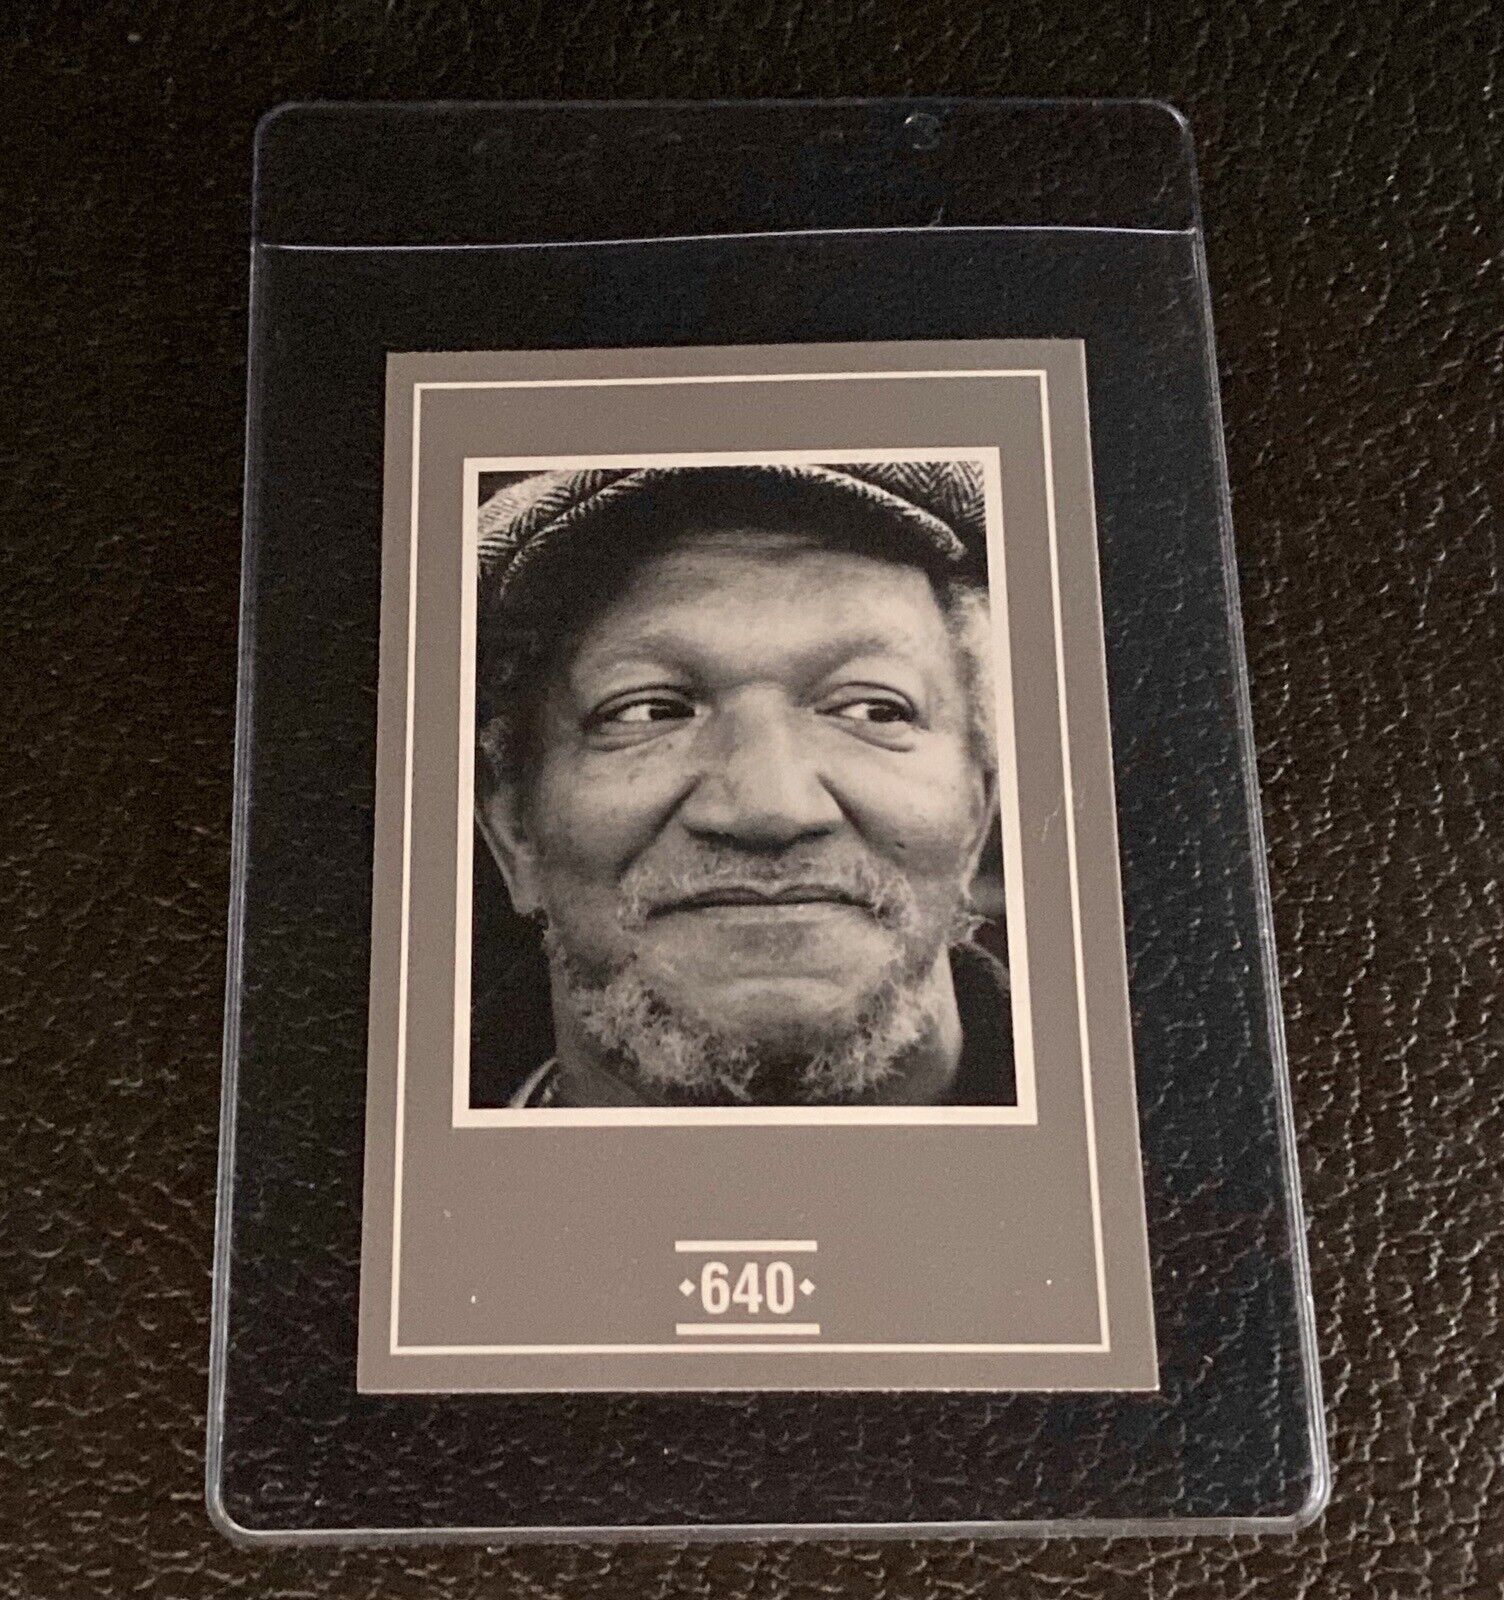 Redd Foxx Card 1991 Face To Face Guessing Game Canada Sanford And Son Comedy